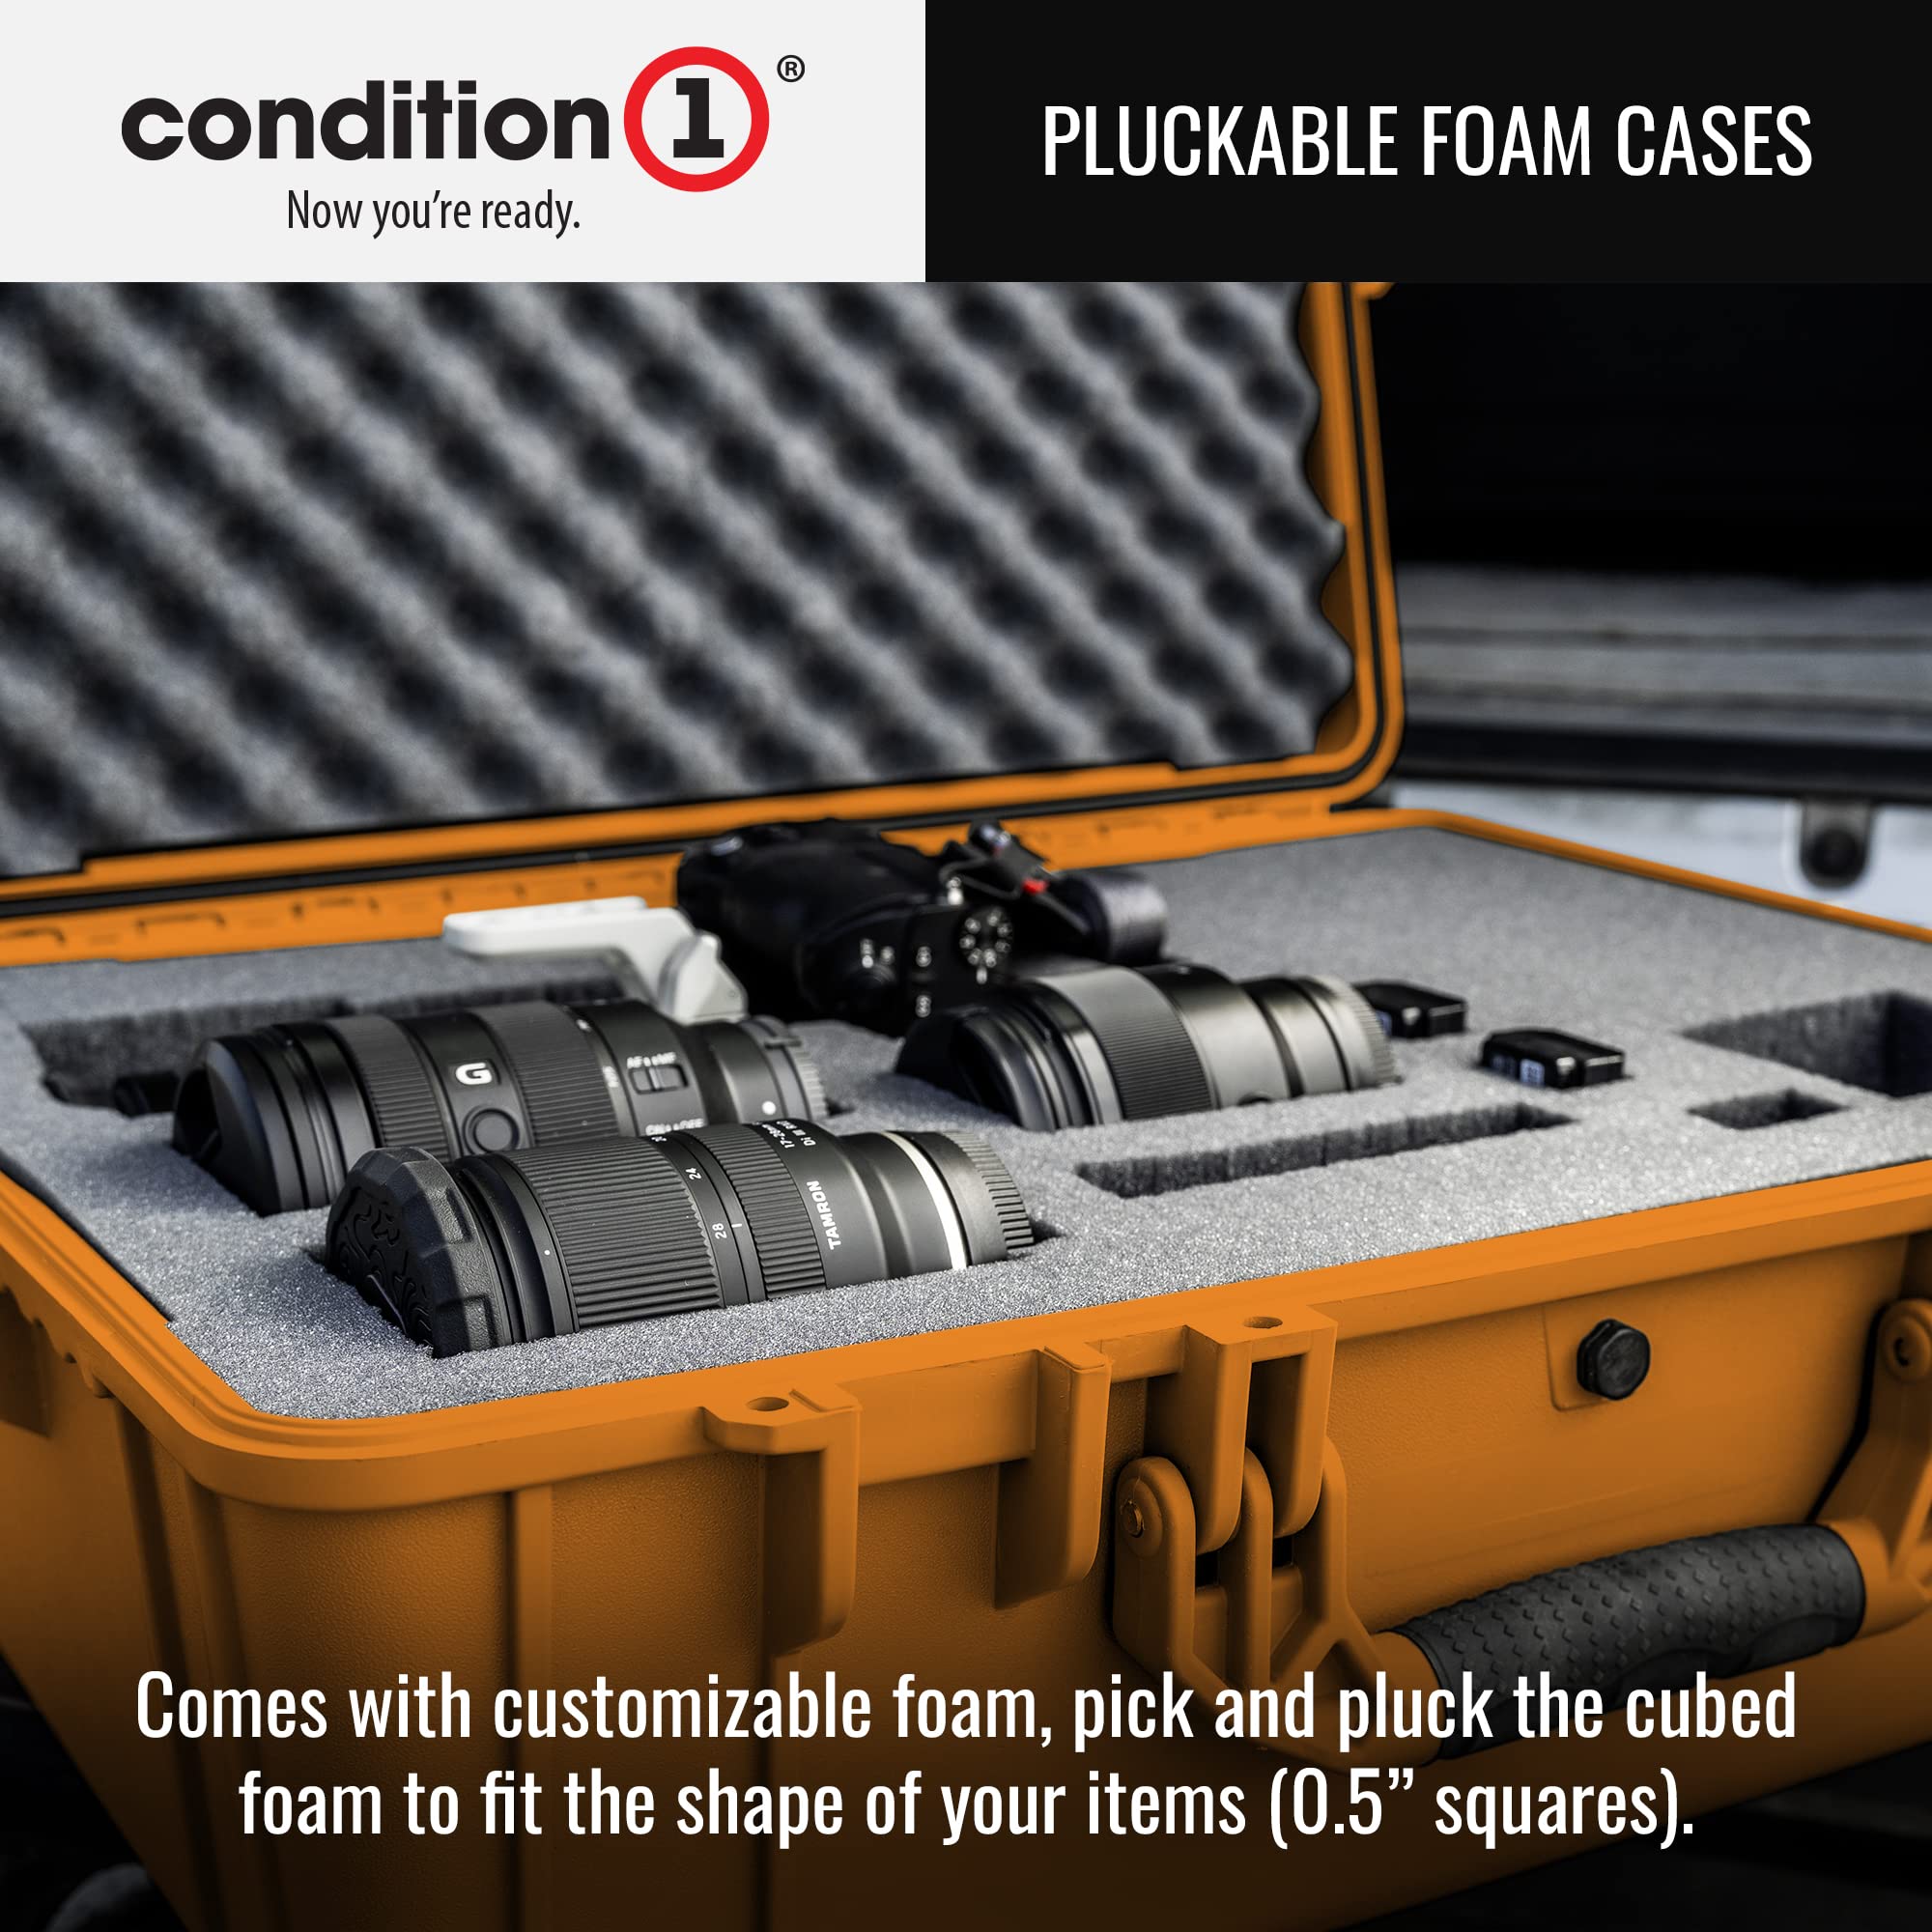 Condition 1 Medium Waterproof Hard Travel Case with Foam Heavy-Duty Protective Portable Storage Box, Camera, Tool, Handgun, Drone Carrying Cases, 13.5